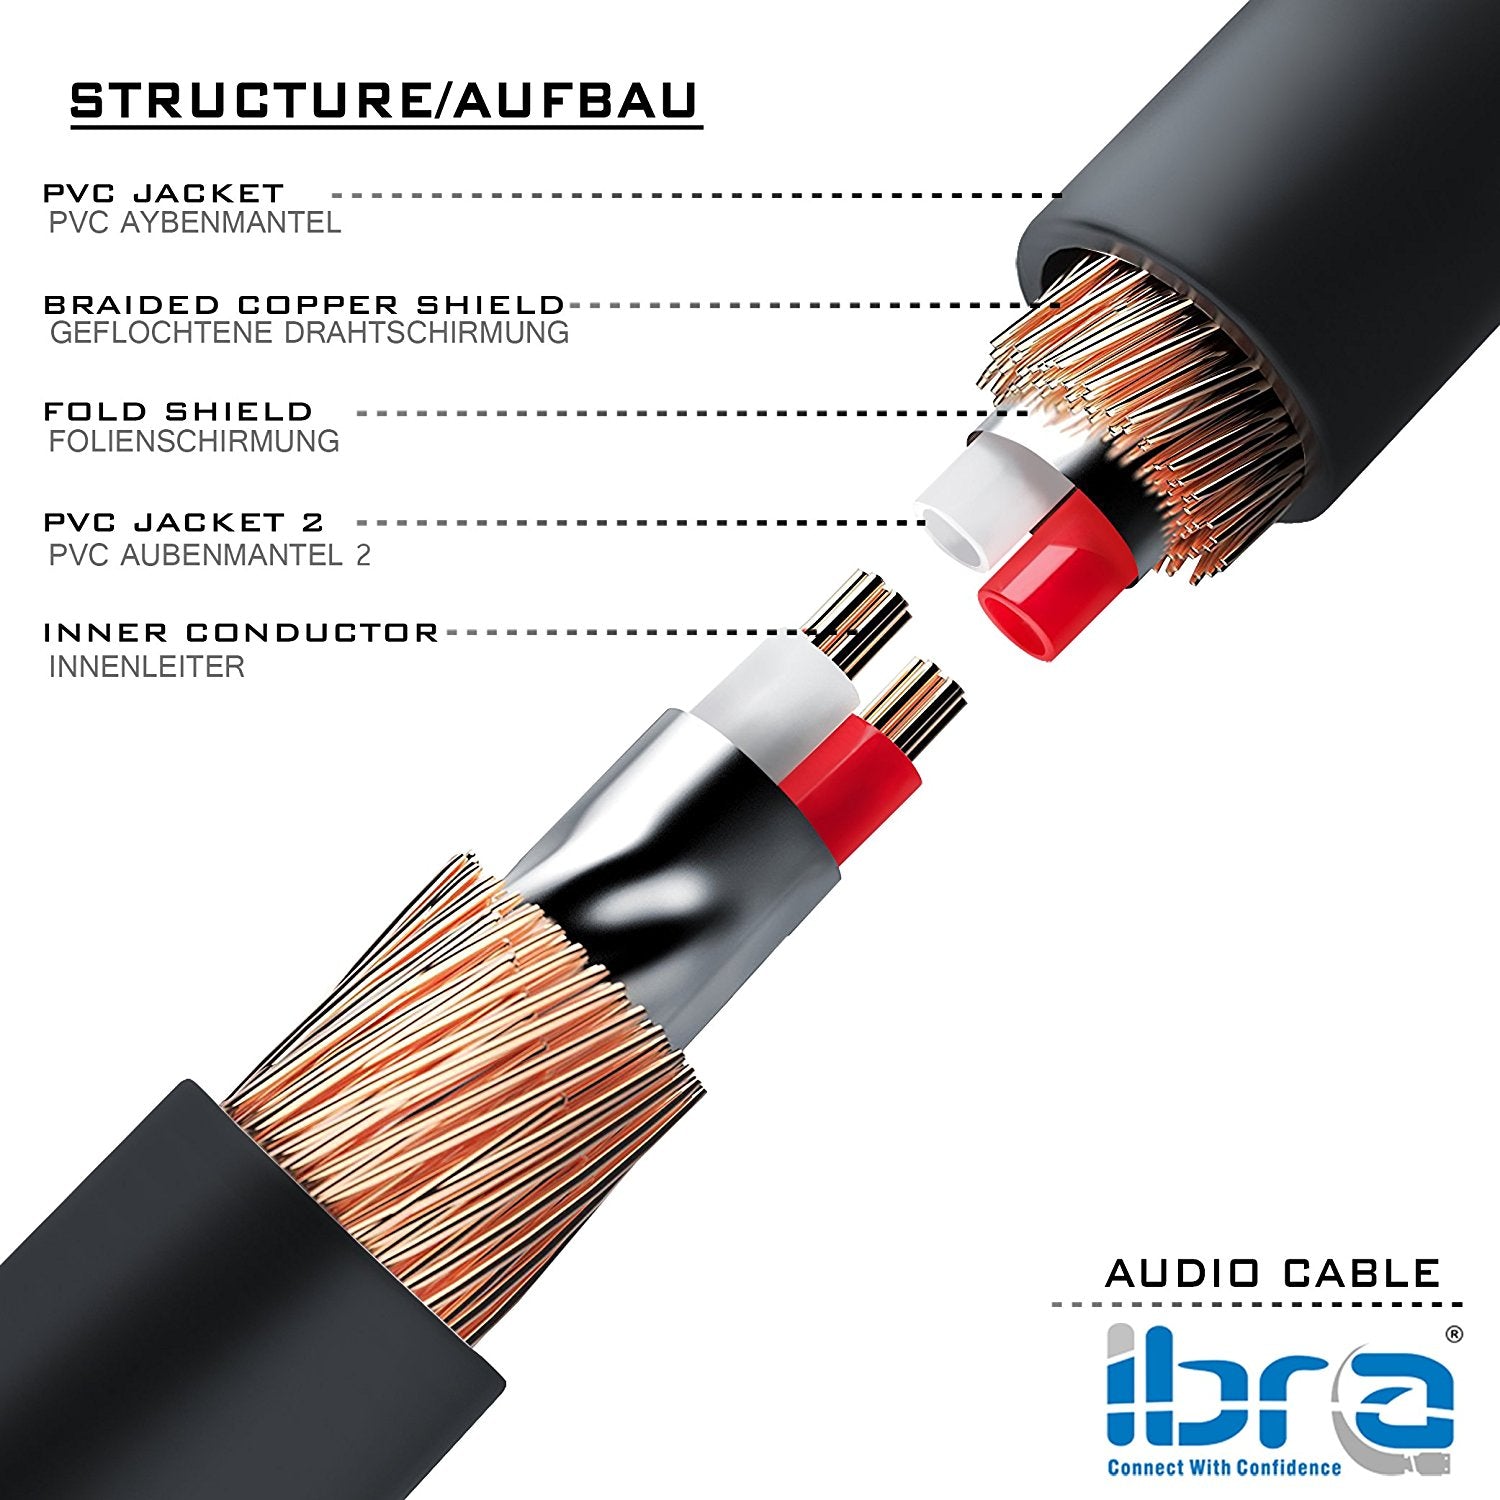 Aux Cable 1.5M 3.5mm Stereo Pro Auxiliary Audio Cable - for Beats Headphones Apple iPod iPhone iPad Samsung LG Smartphone MP3 Player Home / Car etc - IBRA Black